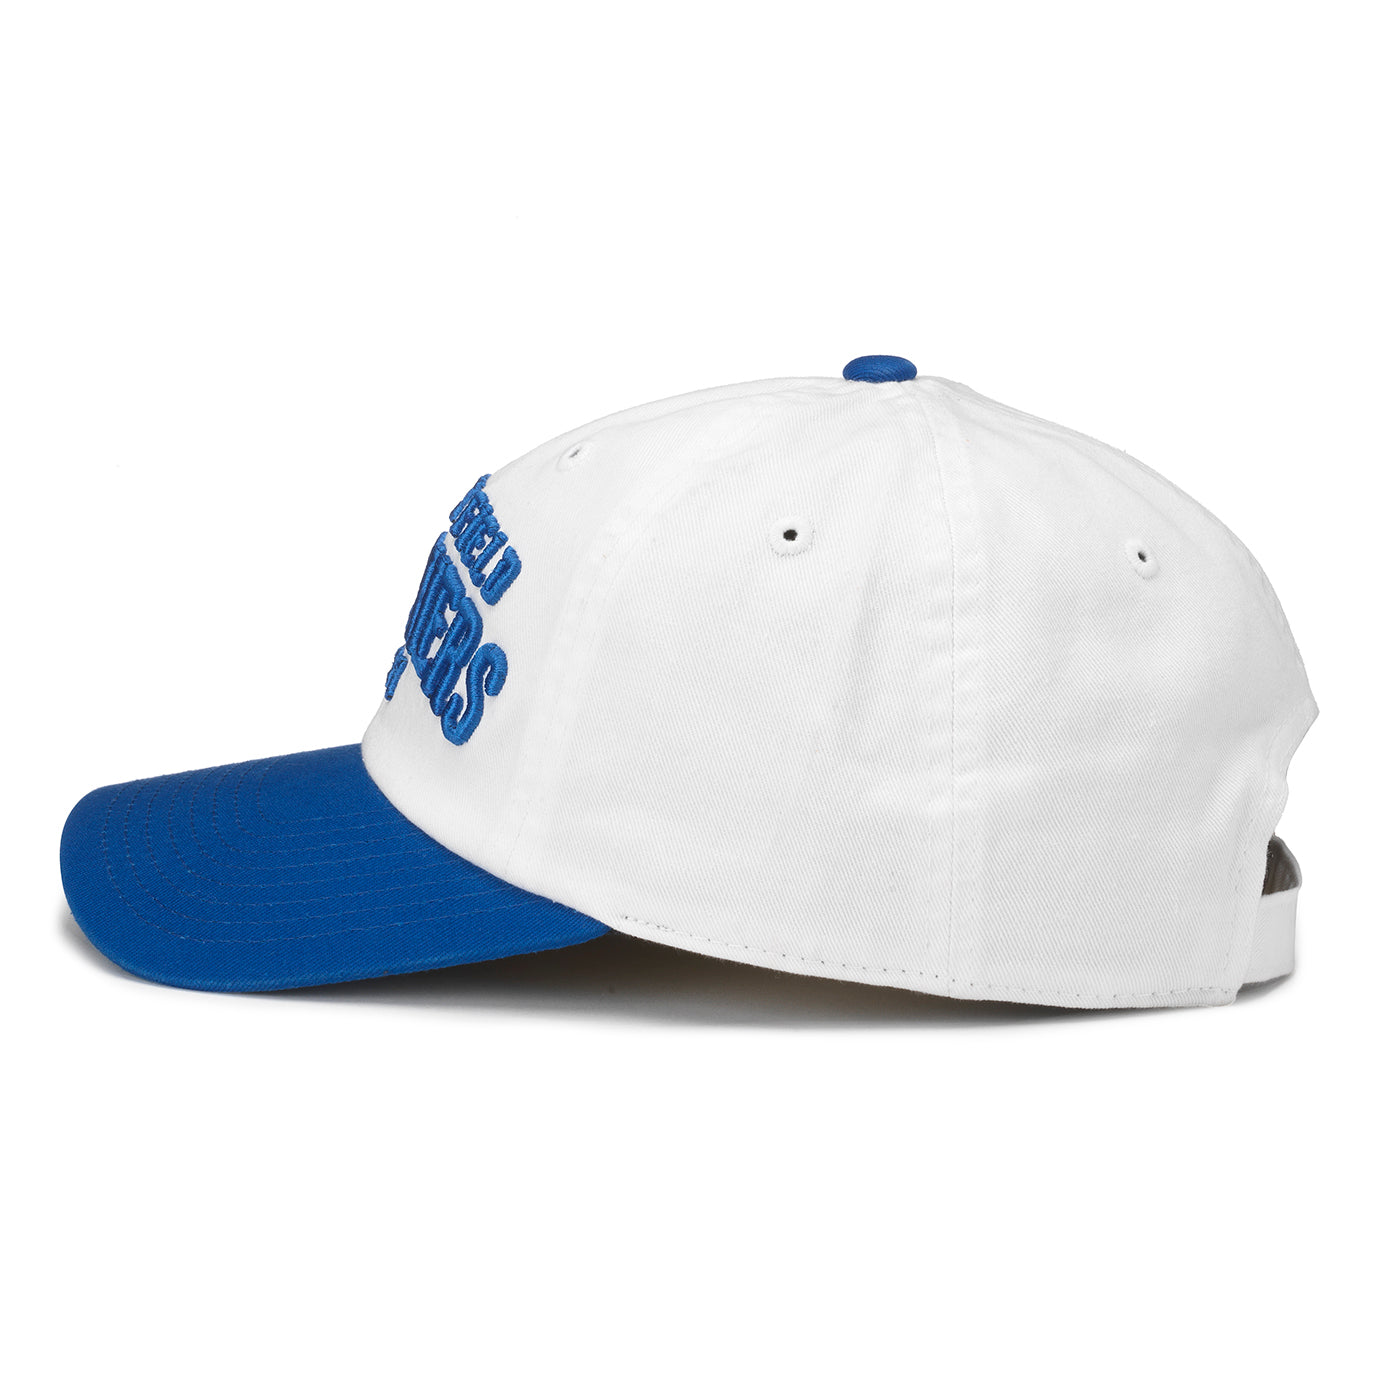 WRIGLEY FIELD AMERICAN NEEDLE BLEACHERS BLUE AND WHITE ADJUSTABLE CAP